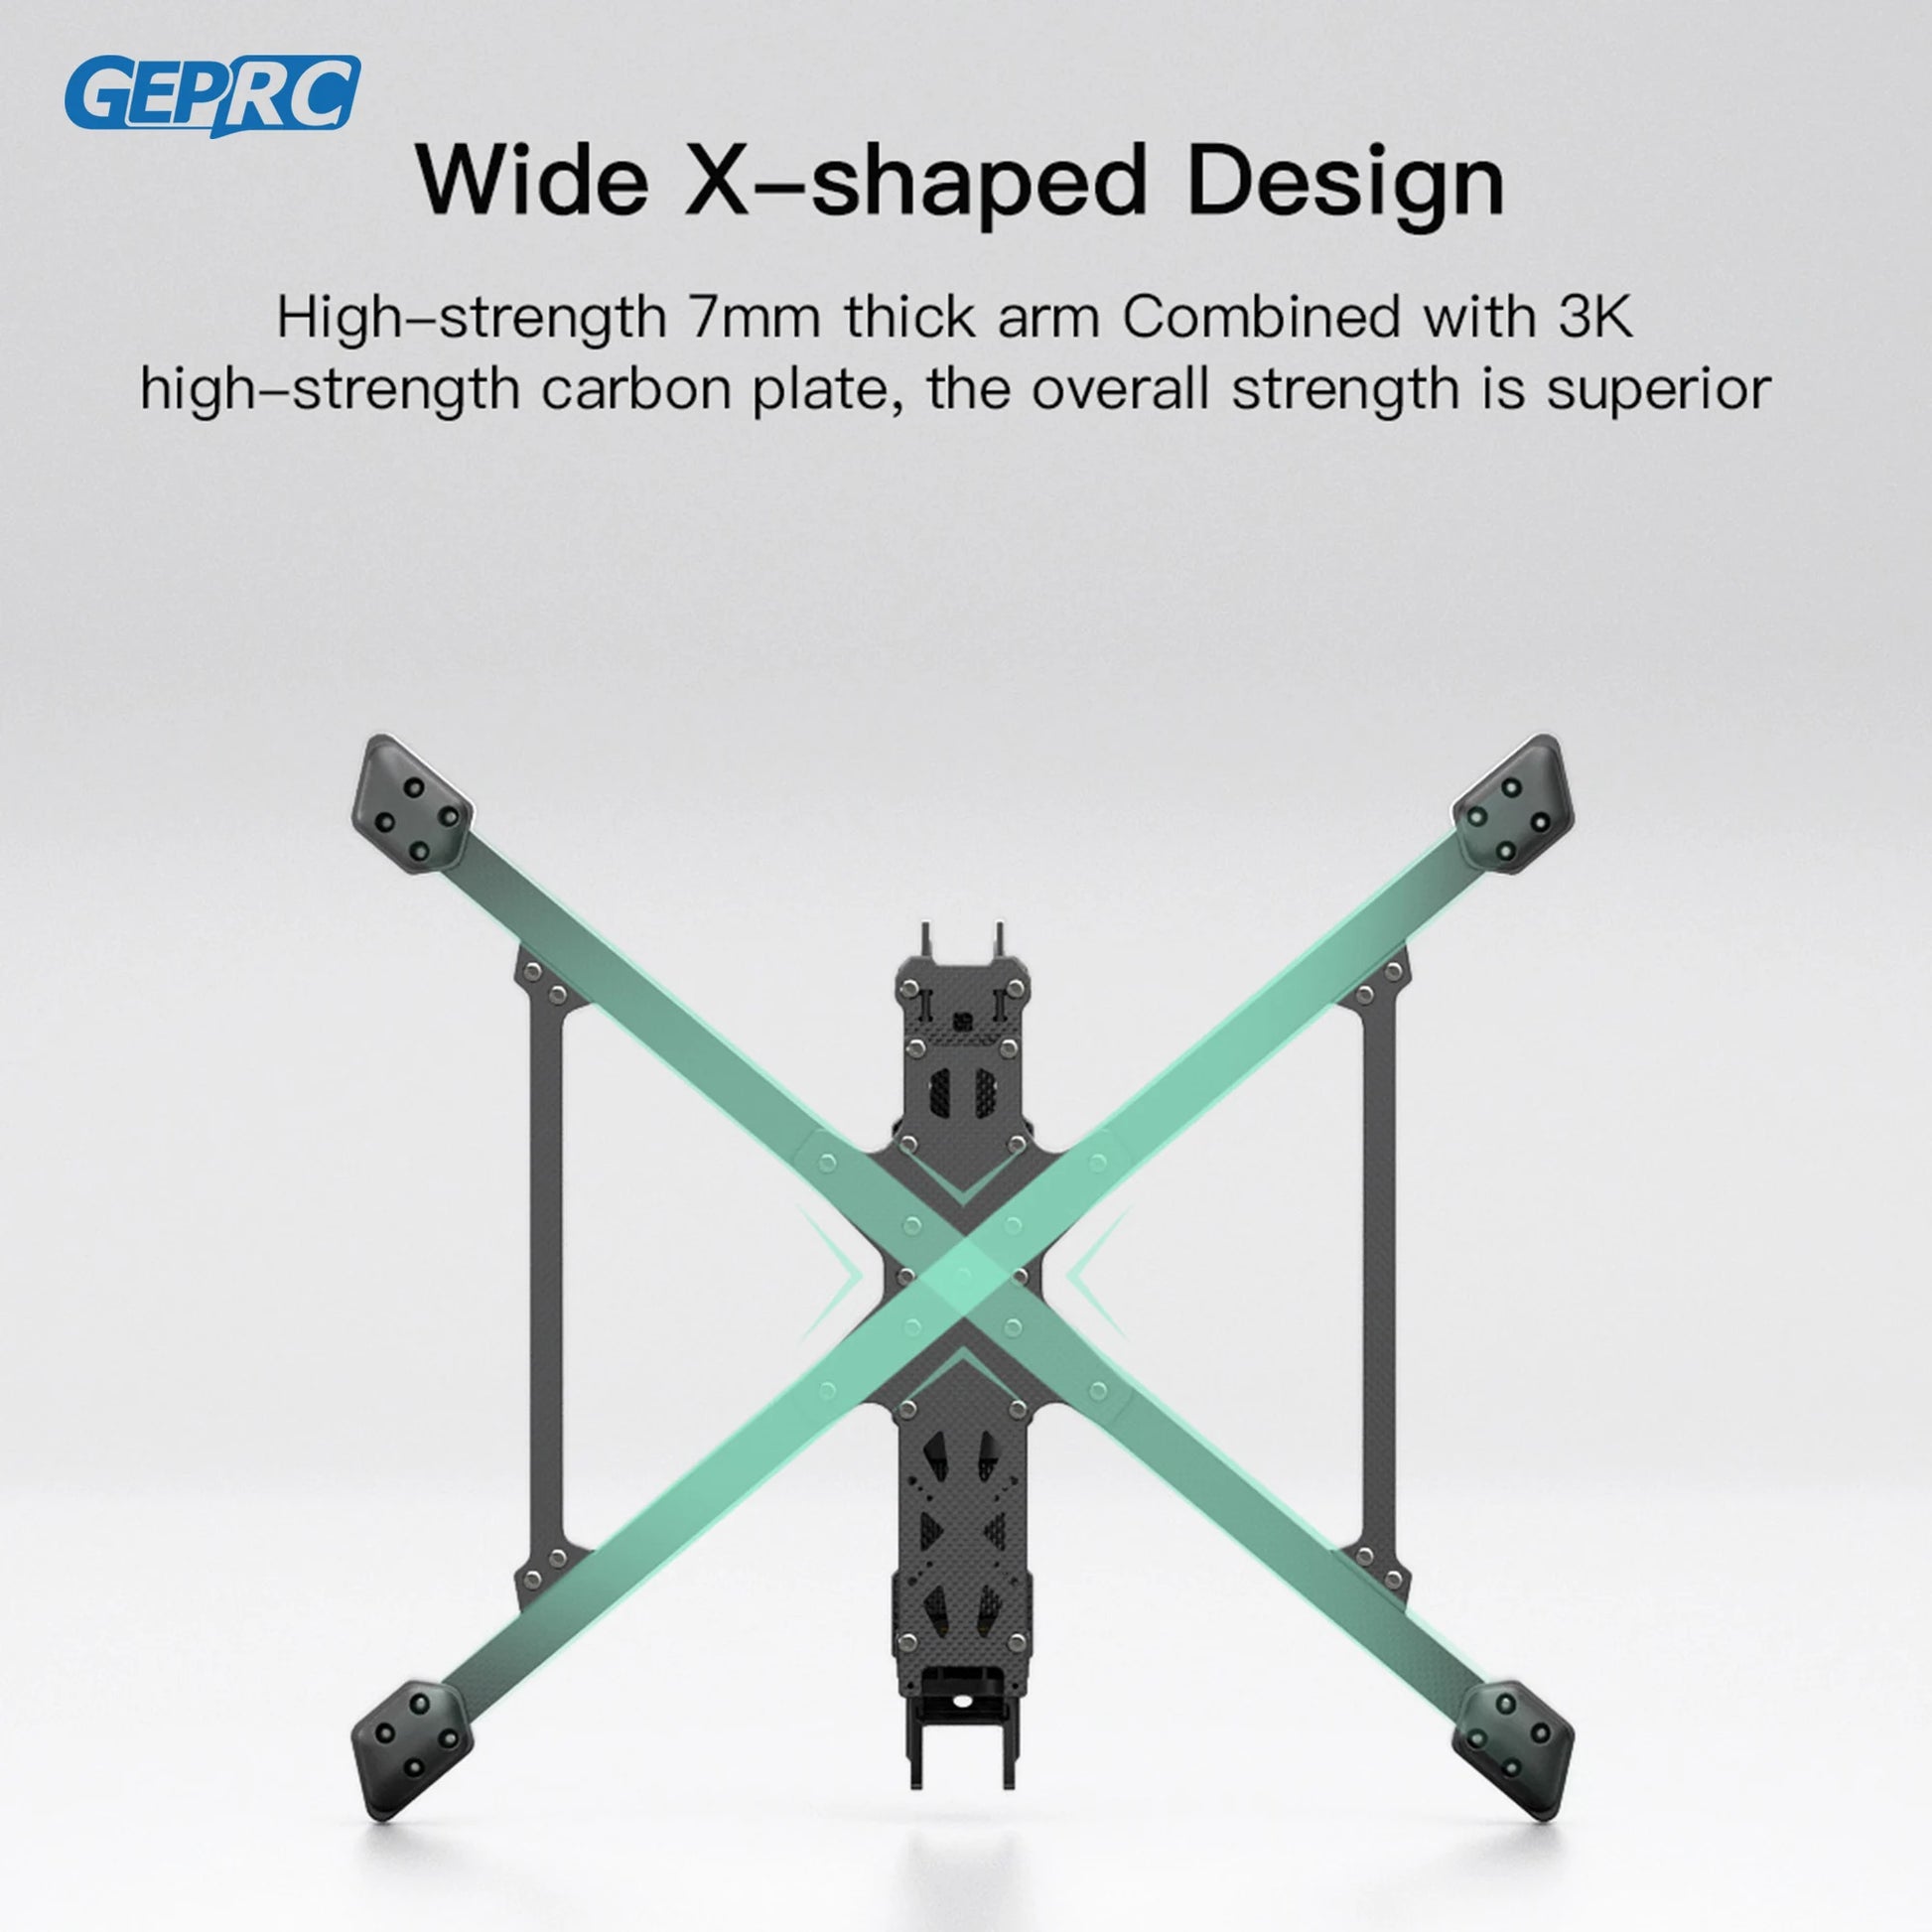 GEPRC GEP-EF10 Frame Parts, GEPRC Wide X-shaped Design High-strength 7mm thick arm